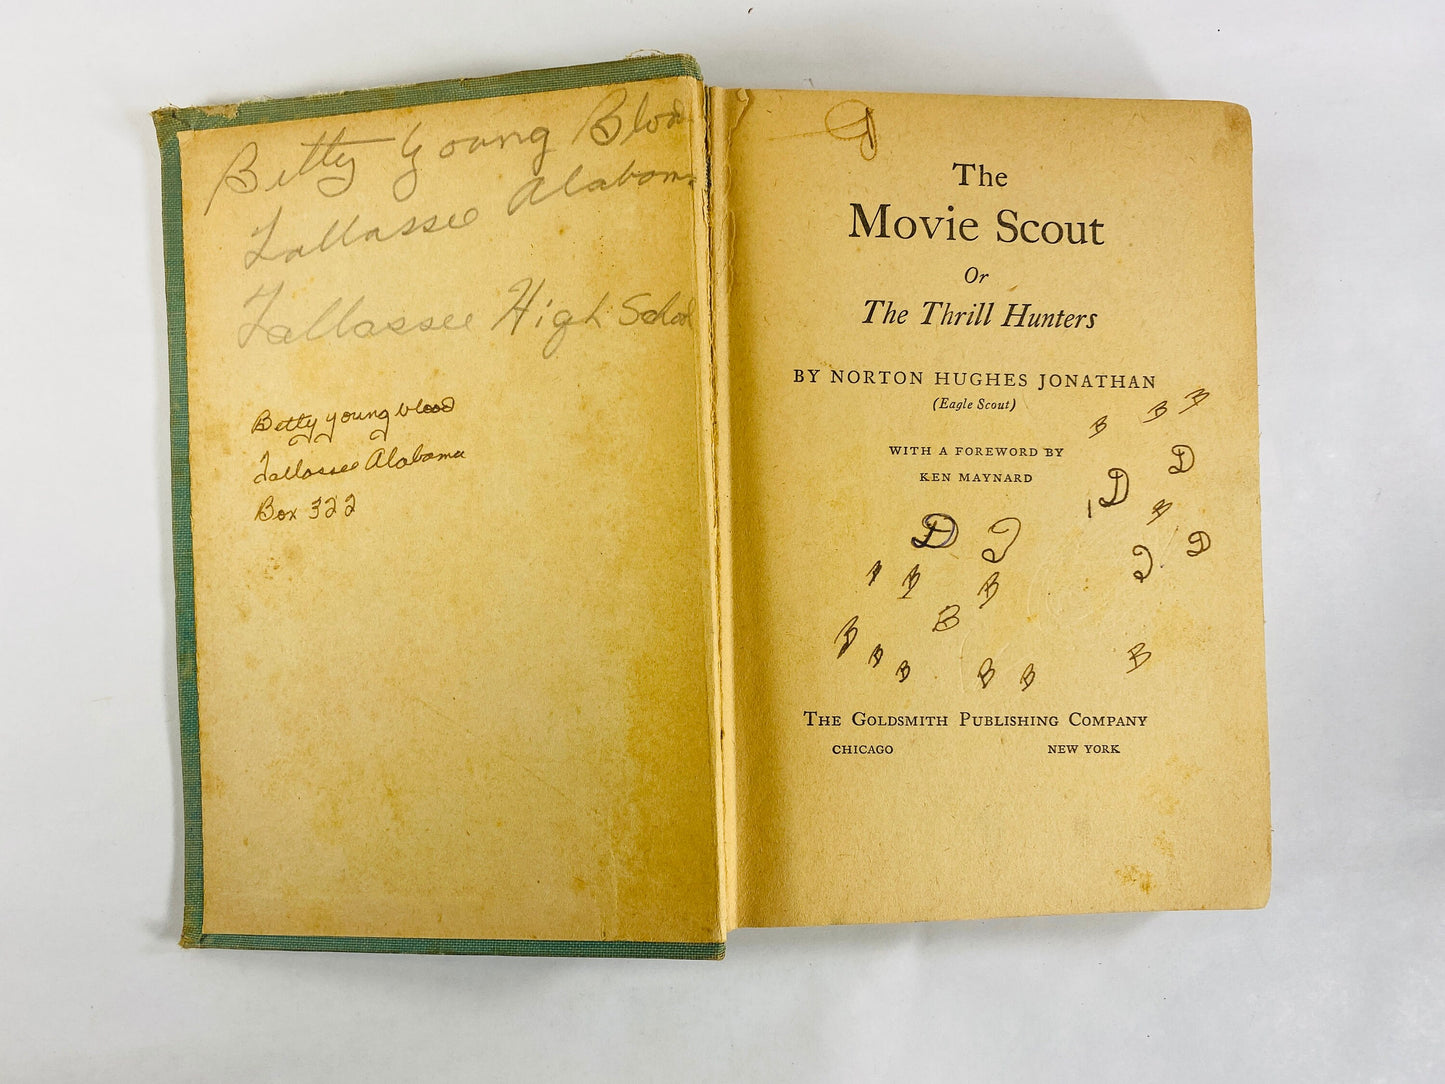 1934 Movie Scout vintage book by Norton Hughes Jonathan about a notorious criminal who escaped from Alcatraz.